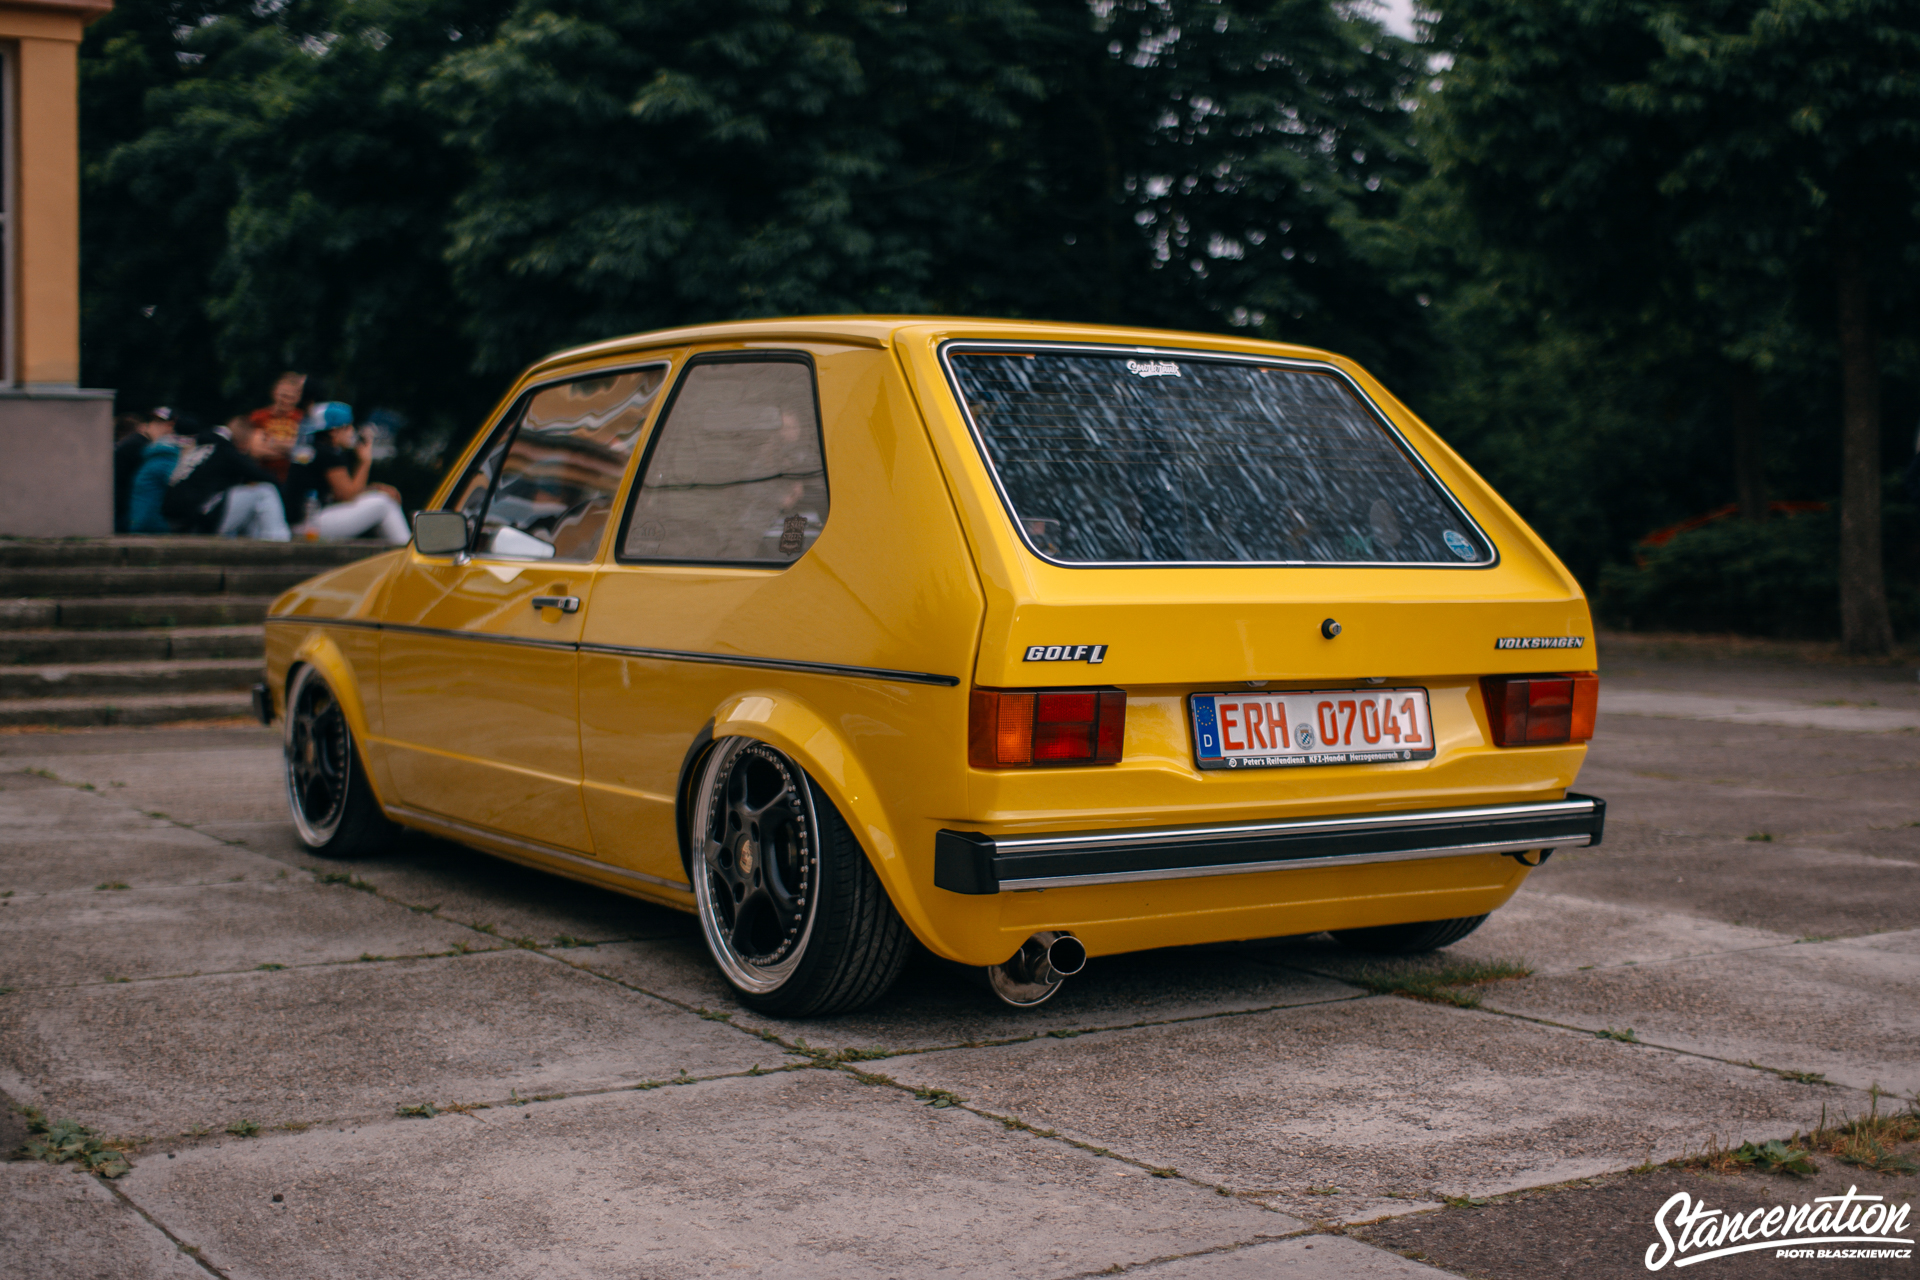 StanceNation, Car, Vehicle, Stance, Camber, Volkswagen, Volkswagen Golf, Volkswagen Golf Mk1 Wallpaper